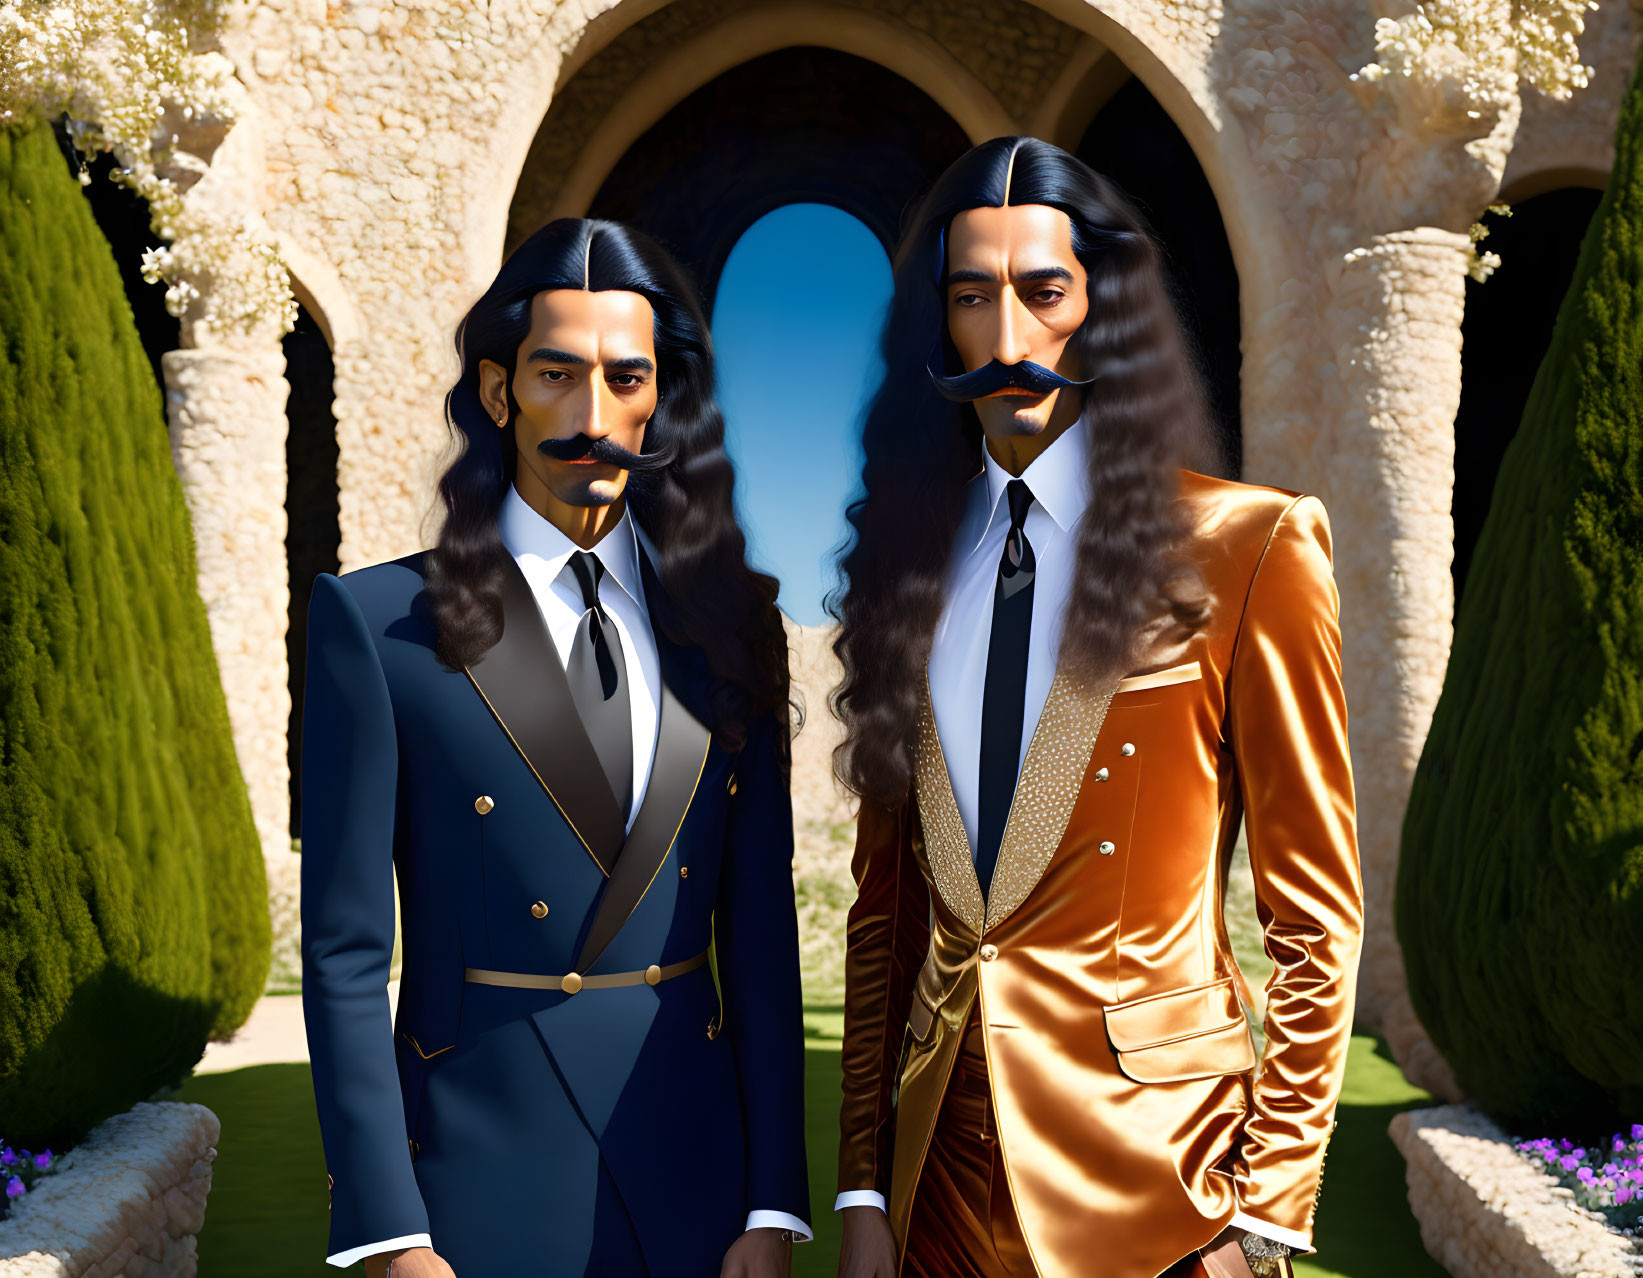 The Dali Brothers 16